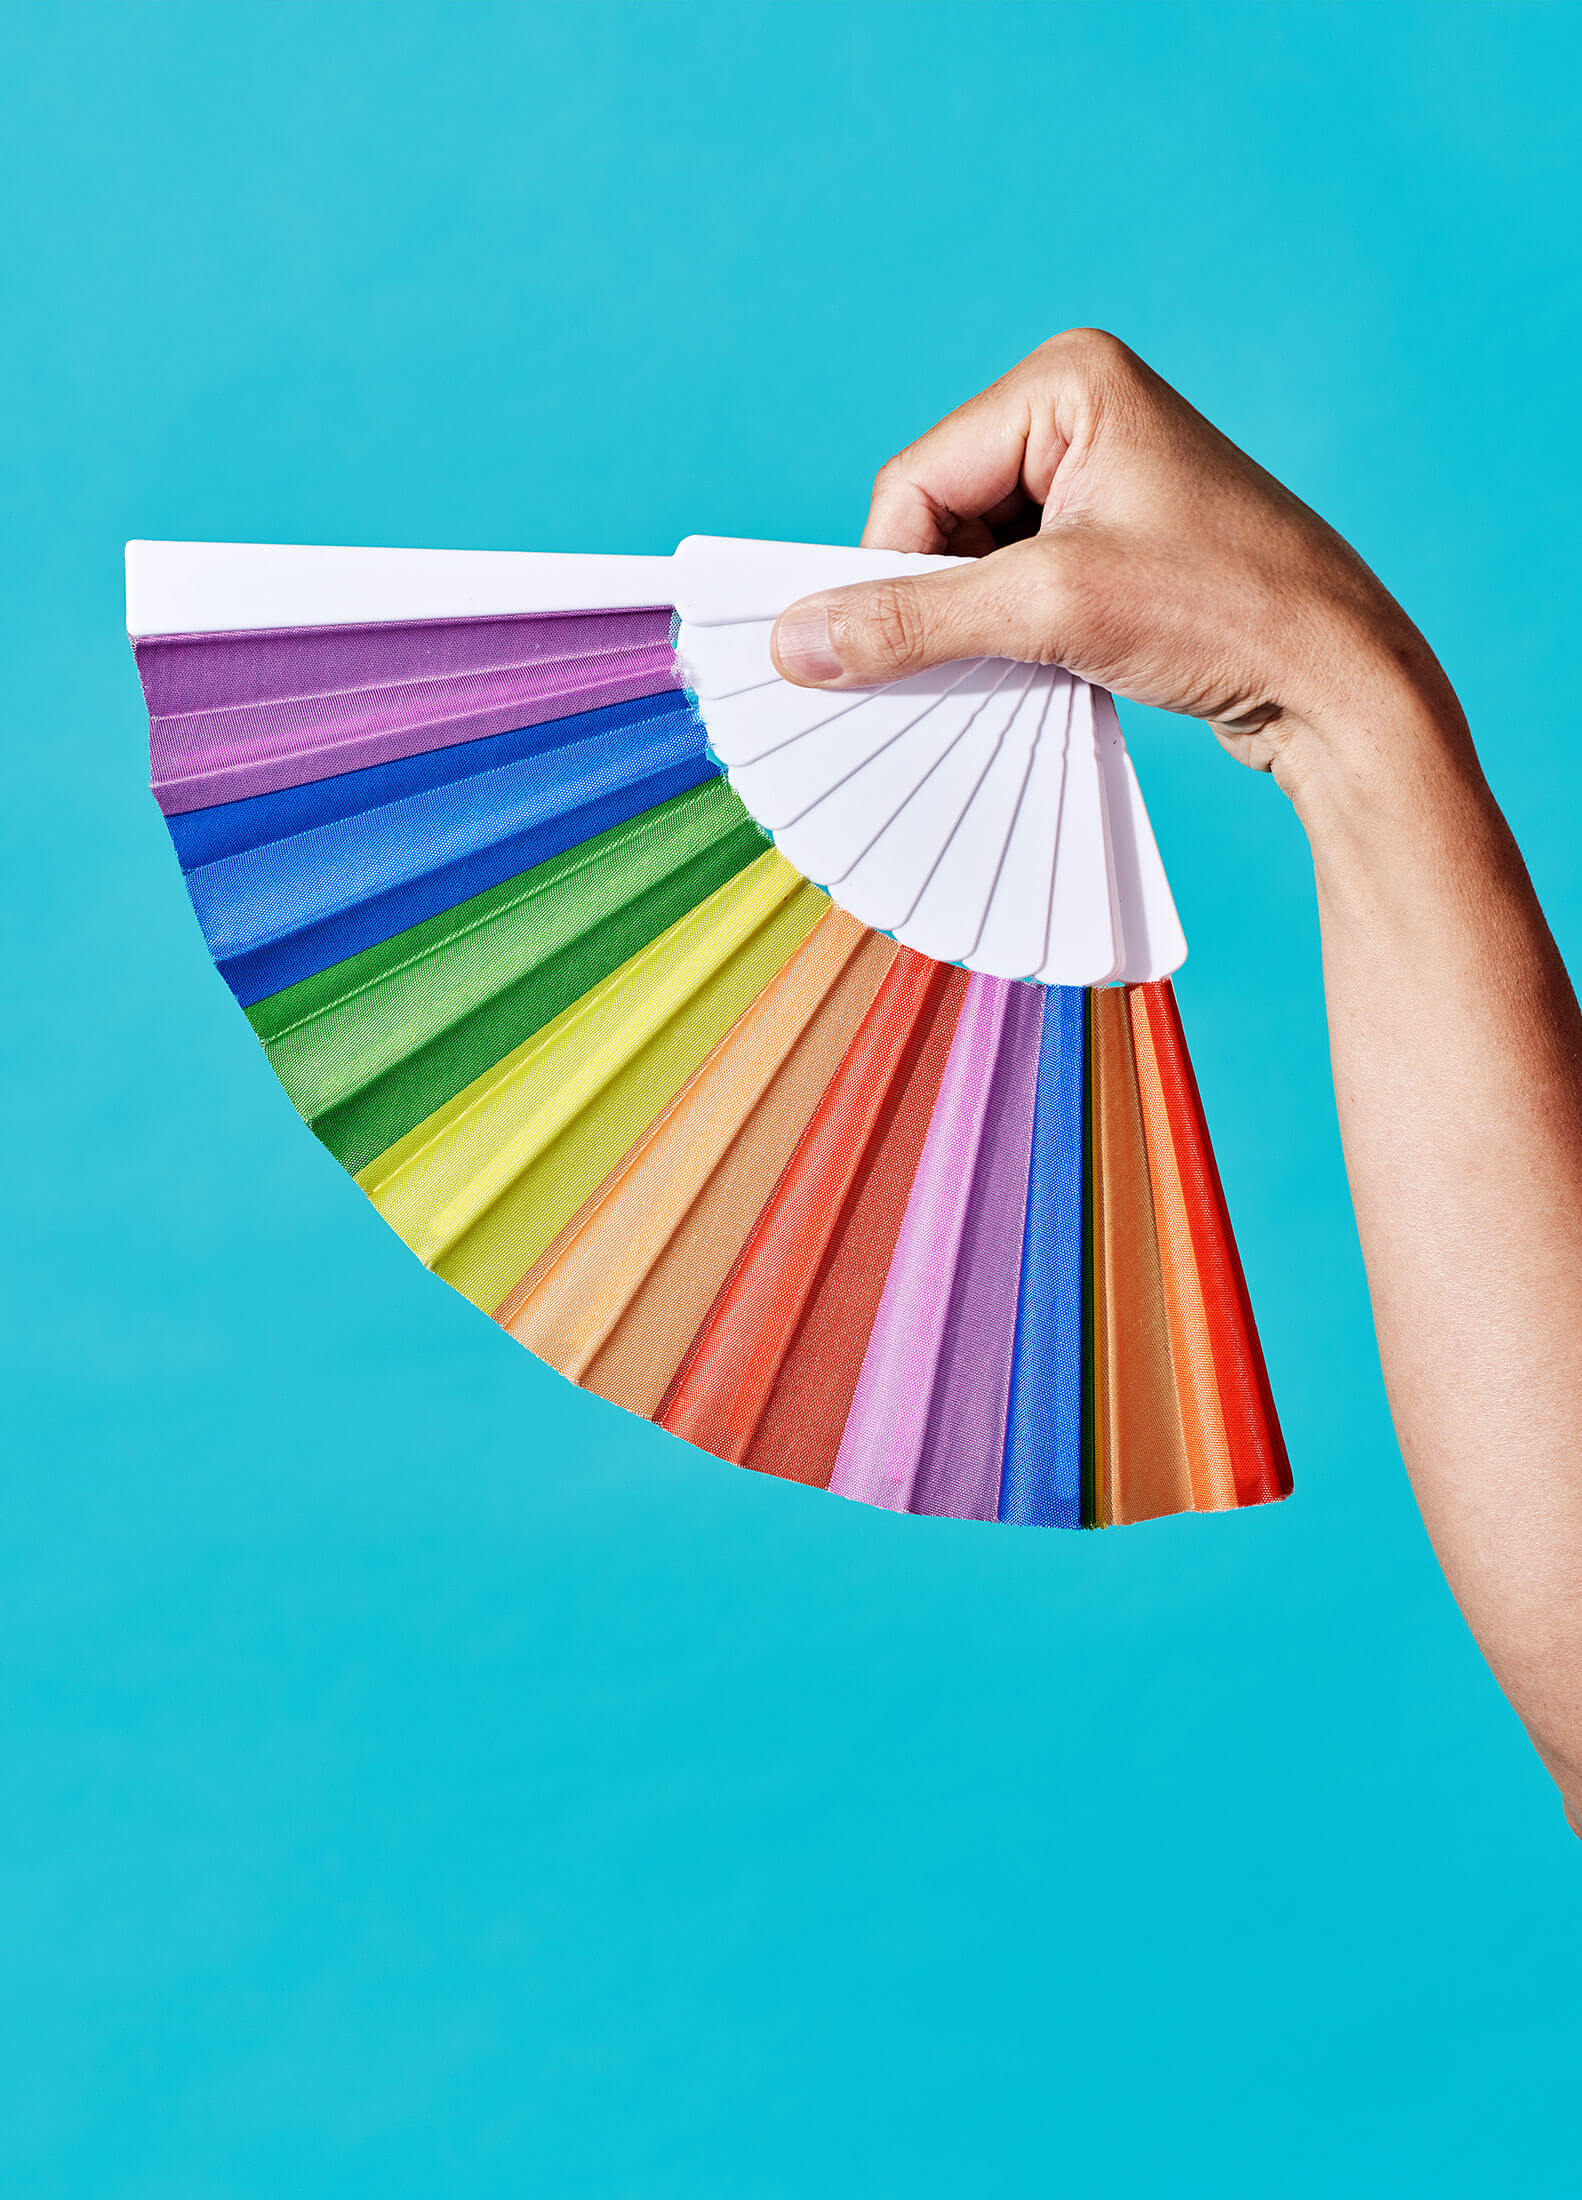 Isolated hand holding a rainbow fan in front of a bright blue background